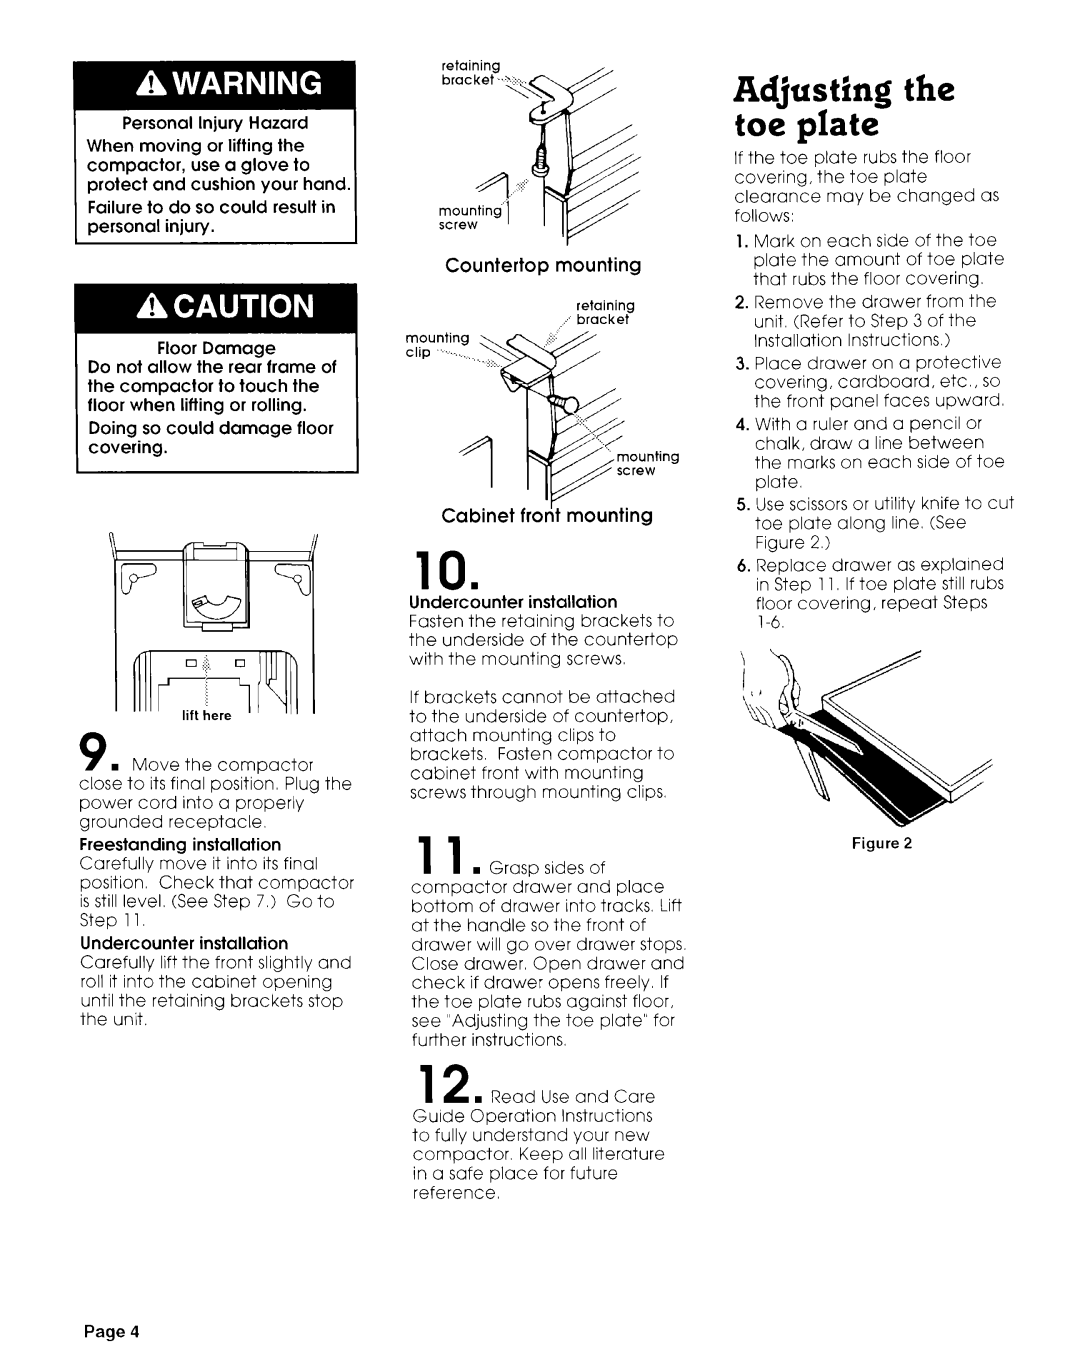 KitchenAid compactor installation instructions Adjusting the toe plate 